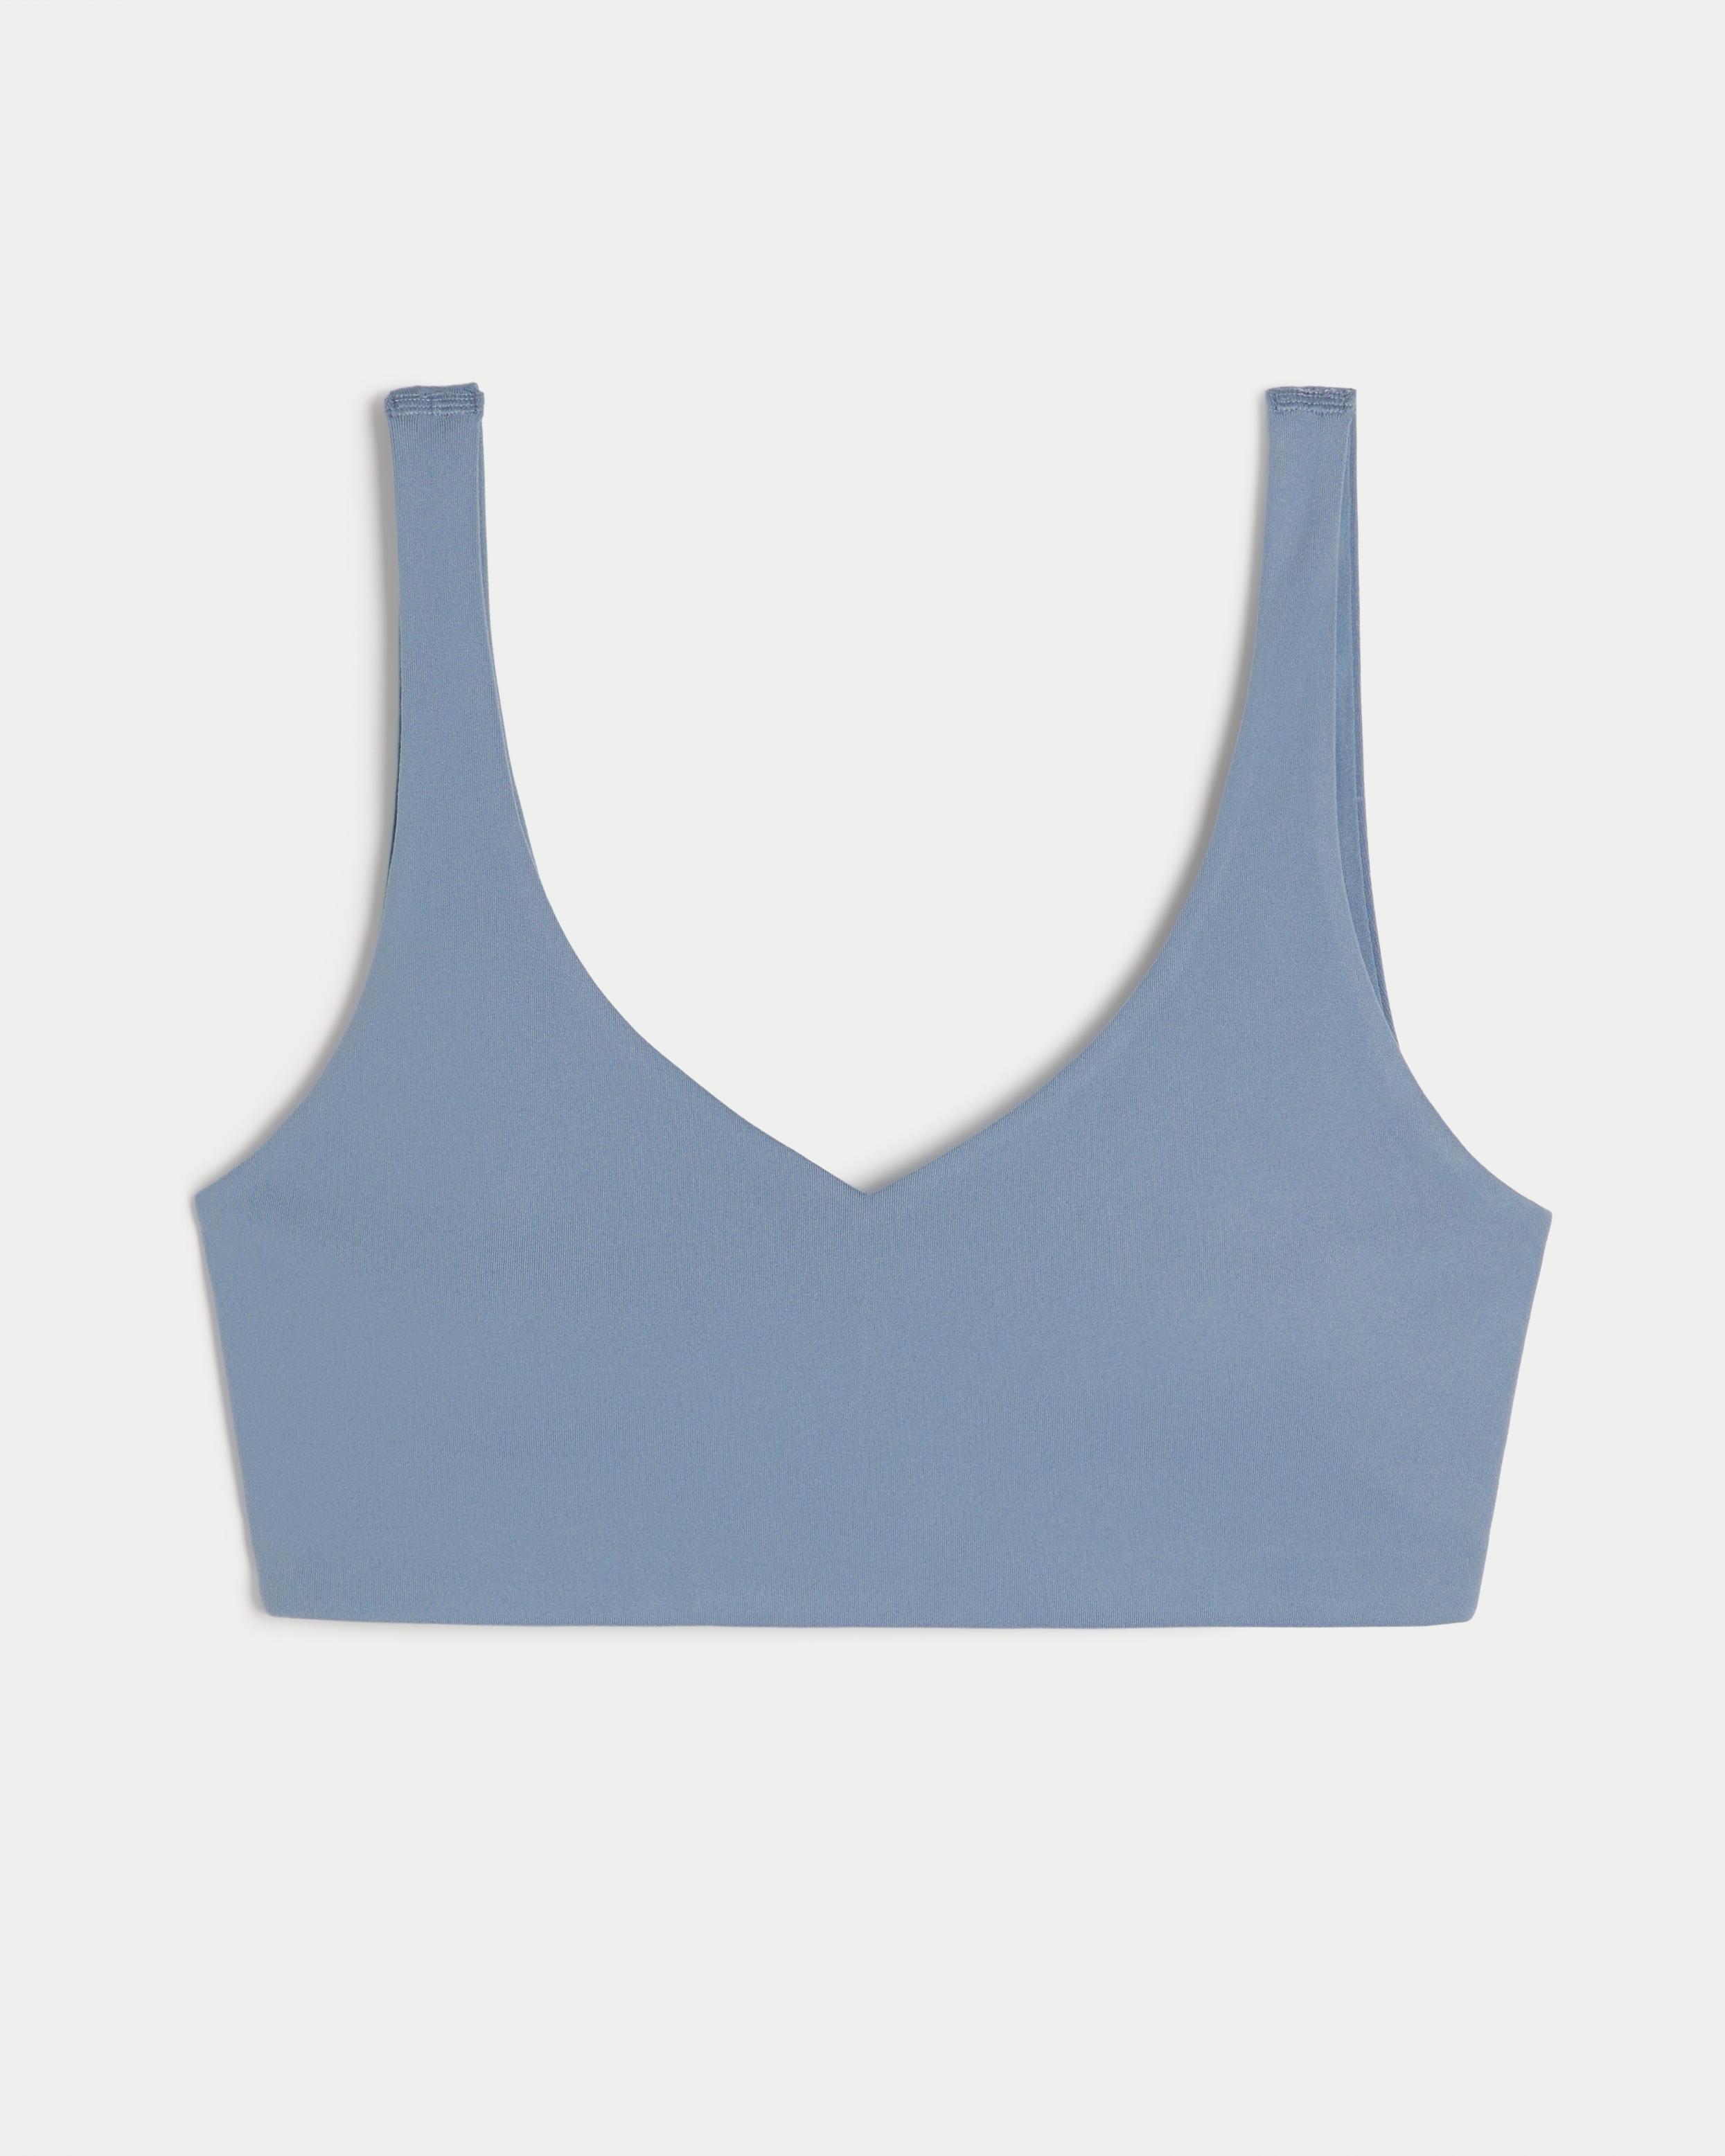 Hollister Gilly Hicks Active Recharge Plunge Sports Bra in Blue